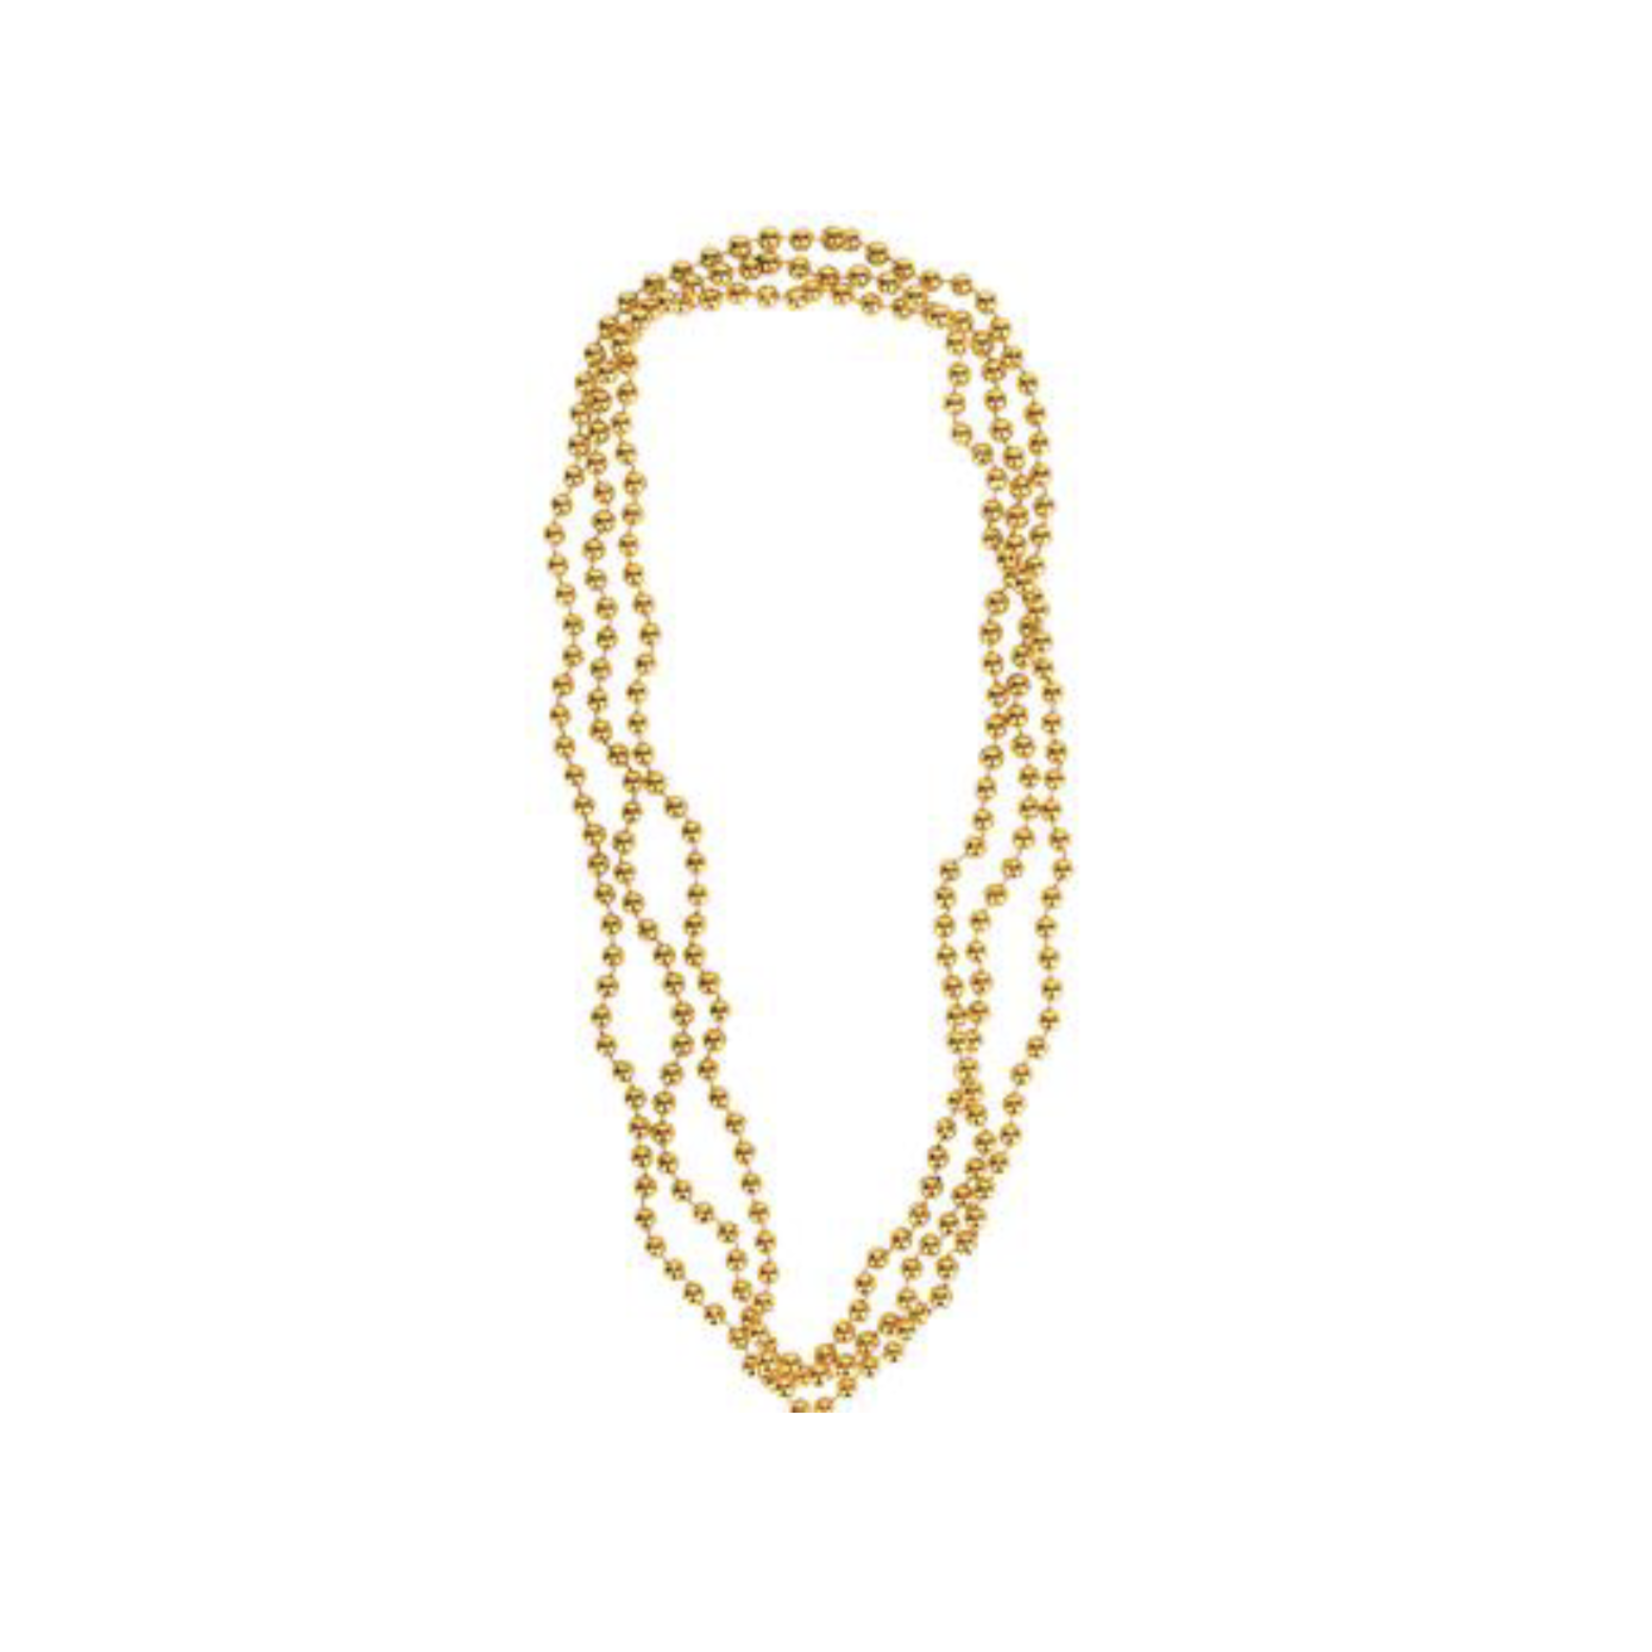 33"" 7 MM GOLD BEADS